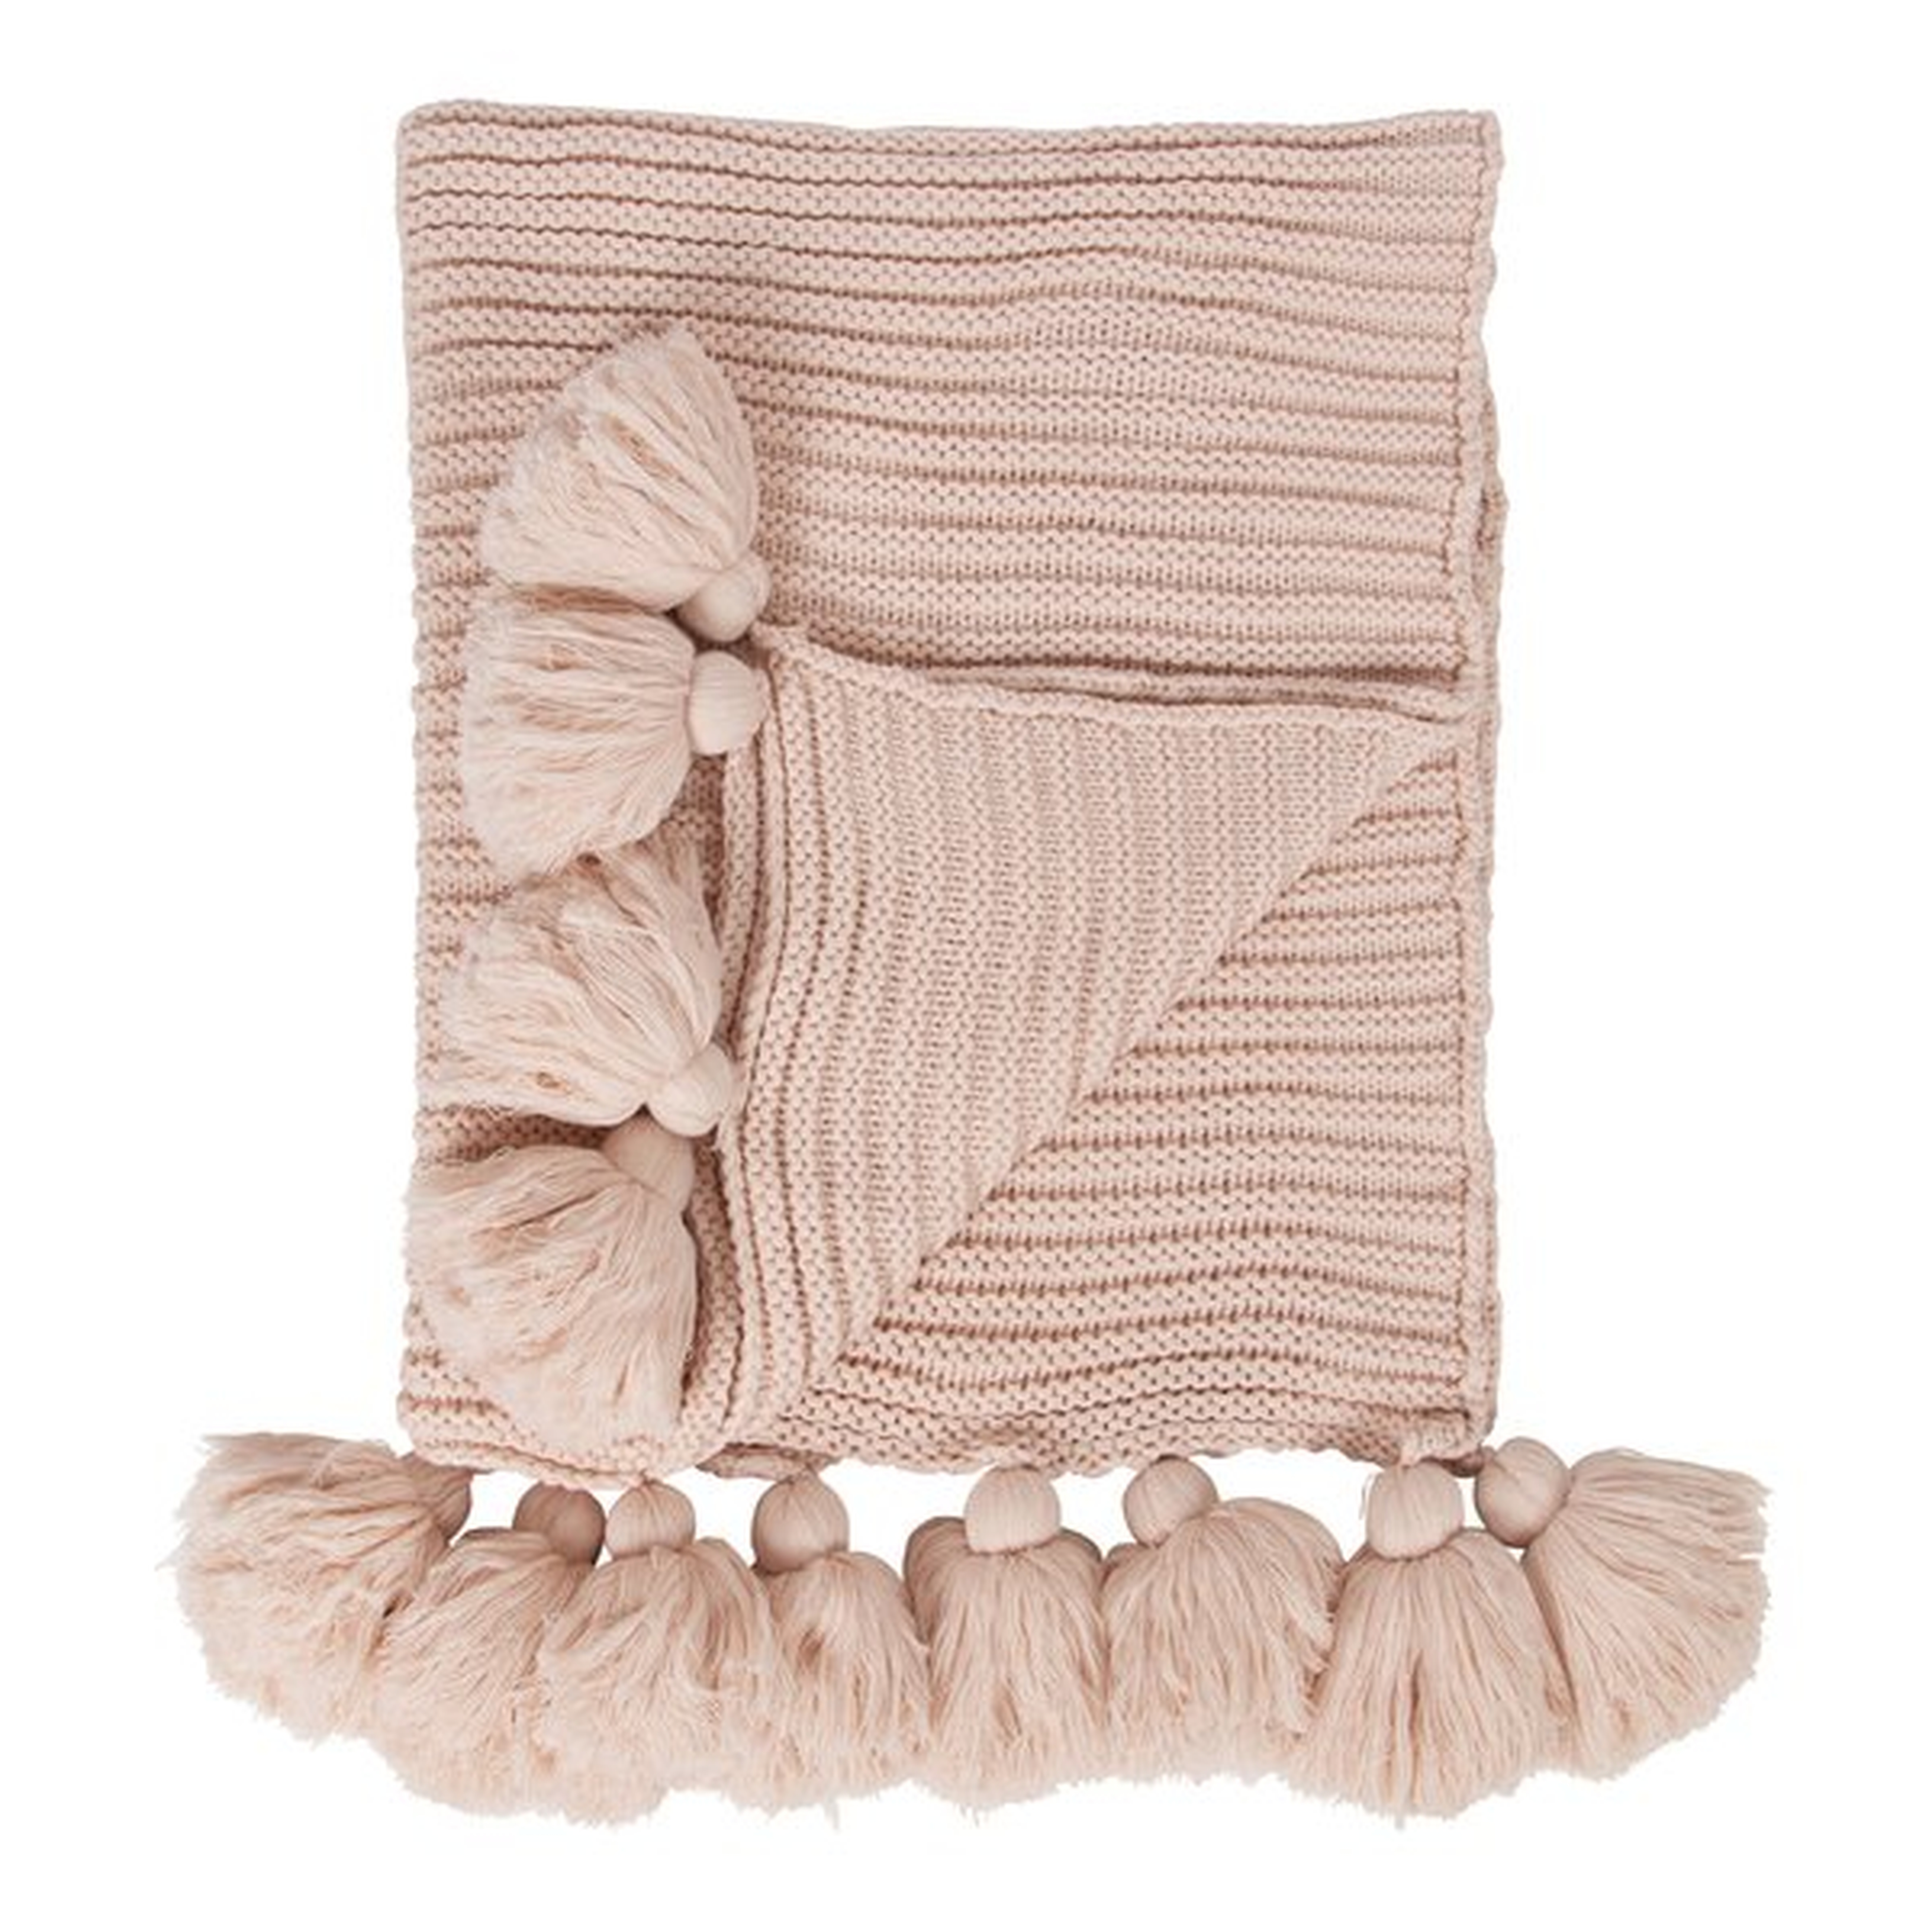 Dorcheer Chunky Ribbed Knit Throw Blanket - Dusty Pink - Wayfair